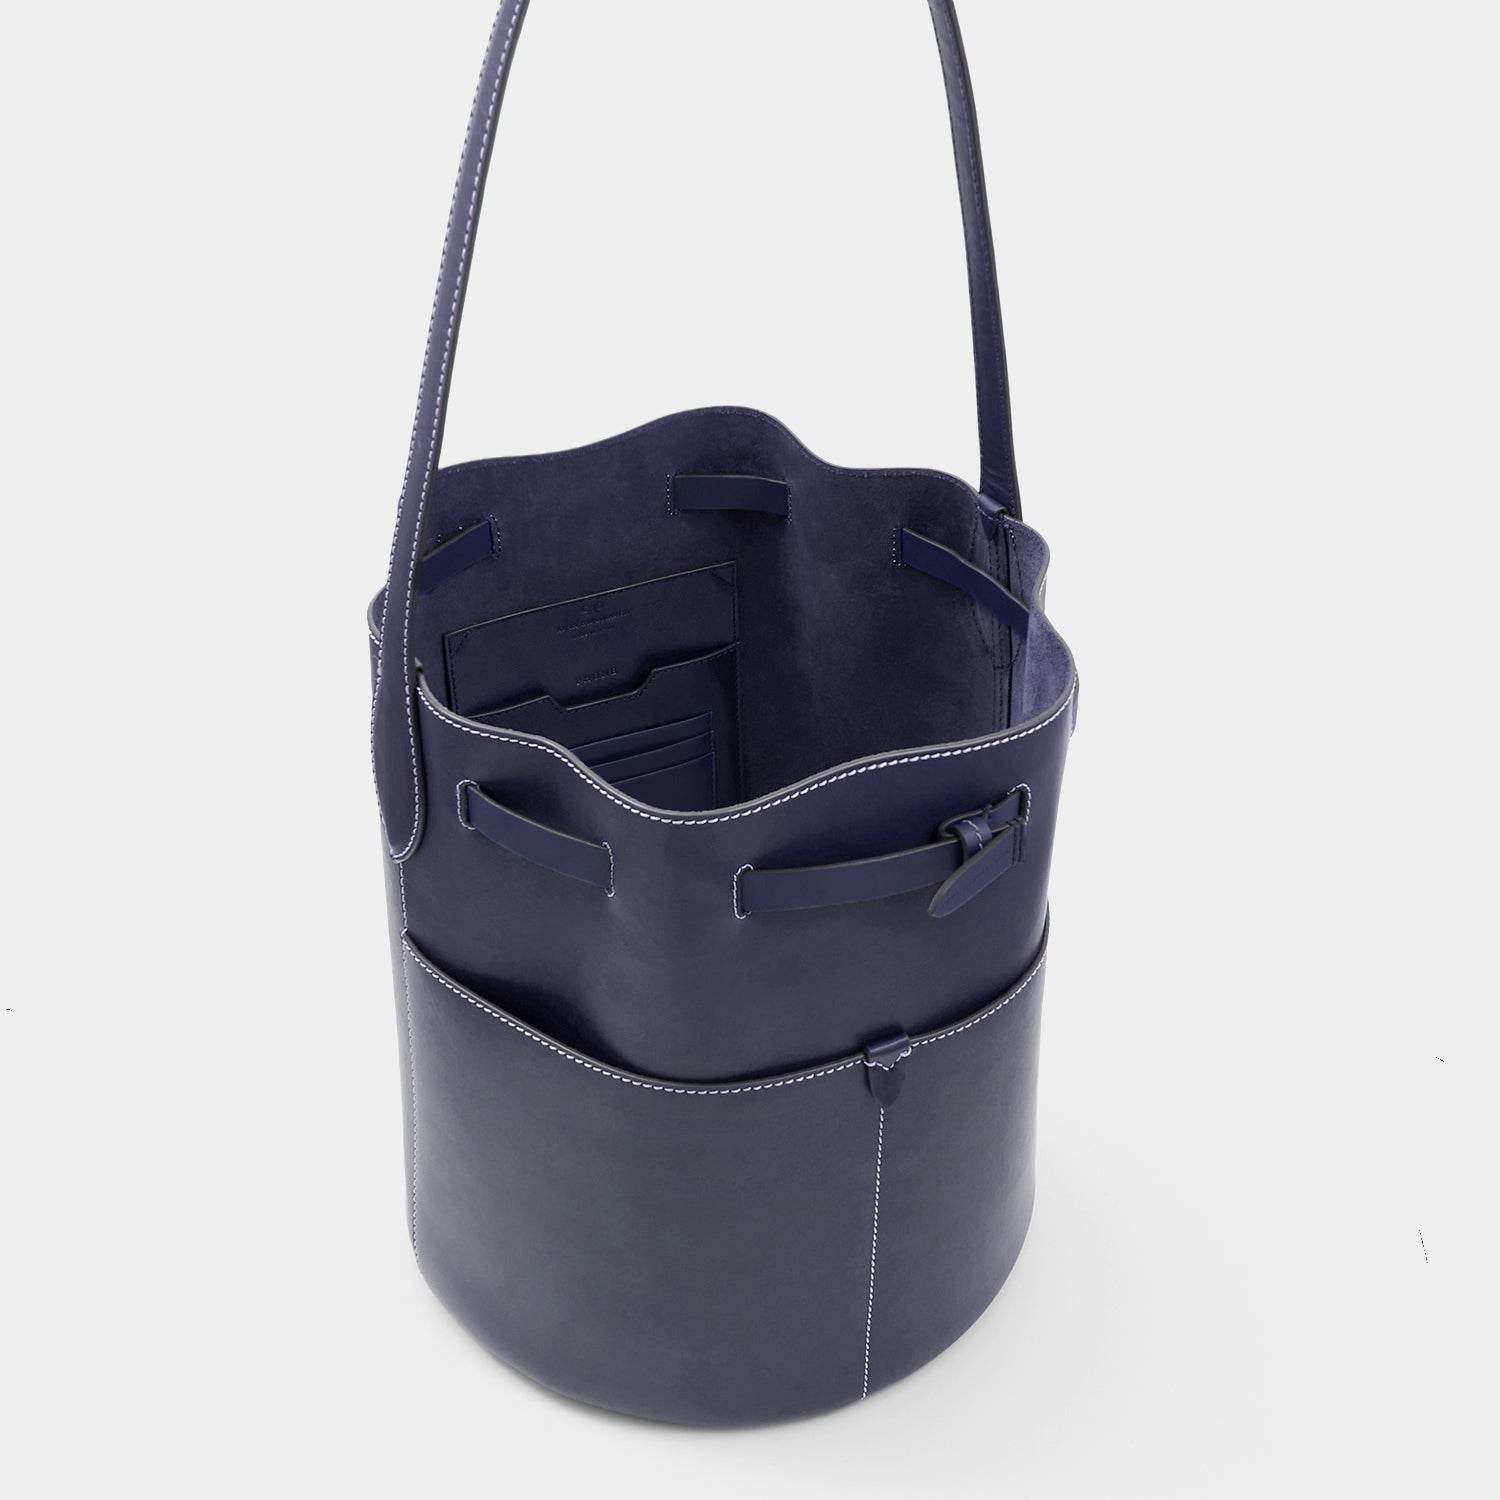 Return to Nature Bucket Bag -

                  
                    Compostable Leather in Marine -
                  

                  Anya Hindmarch UK
